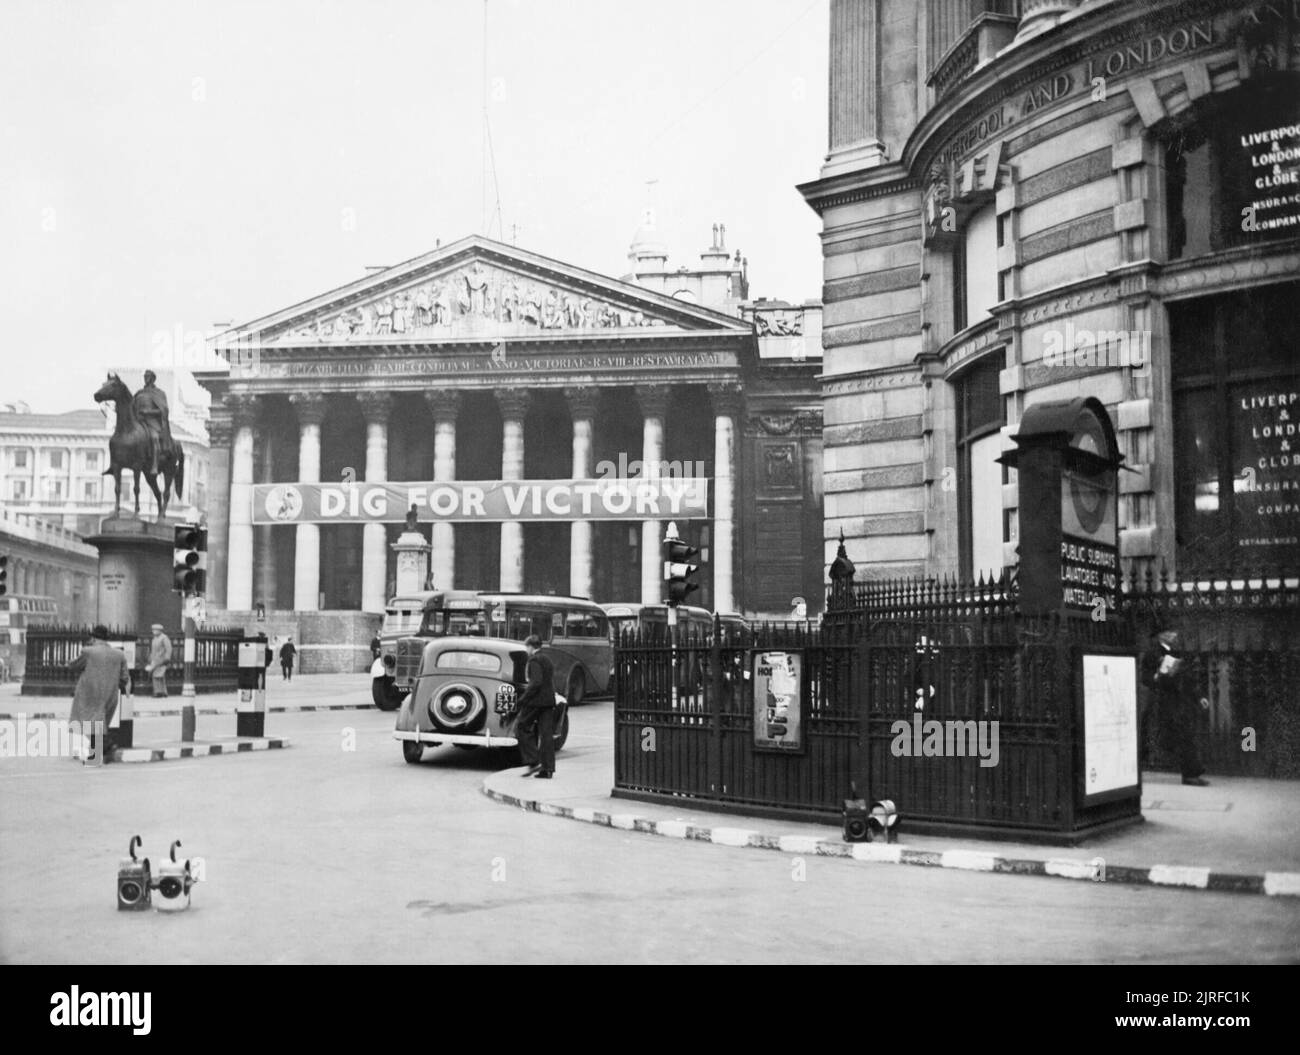 The Royal Exchange in London in use as a Ministry of Information 'special poster site' with a 'Dig for Victory banner' across the entrance in 1940. A view of the Royal Exchange in London, which was used as a Ministry of Information 'special poster site'. A 'Dig for Victory banner' is hanging across the columns at the front. Stock Photo